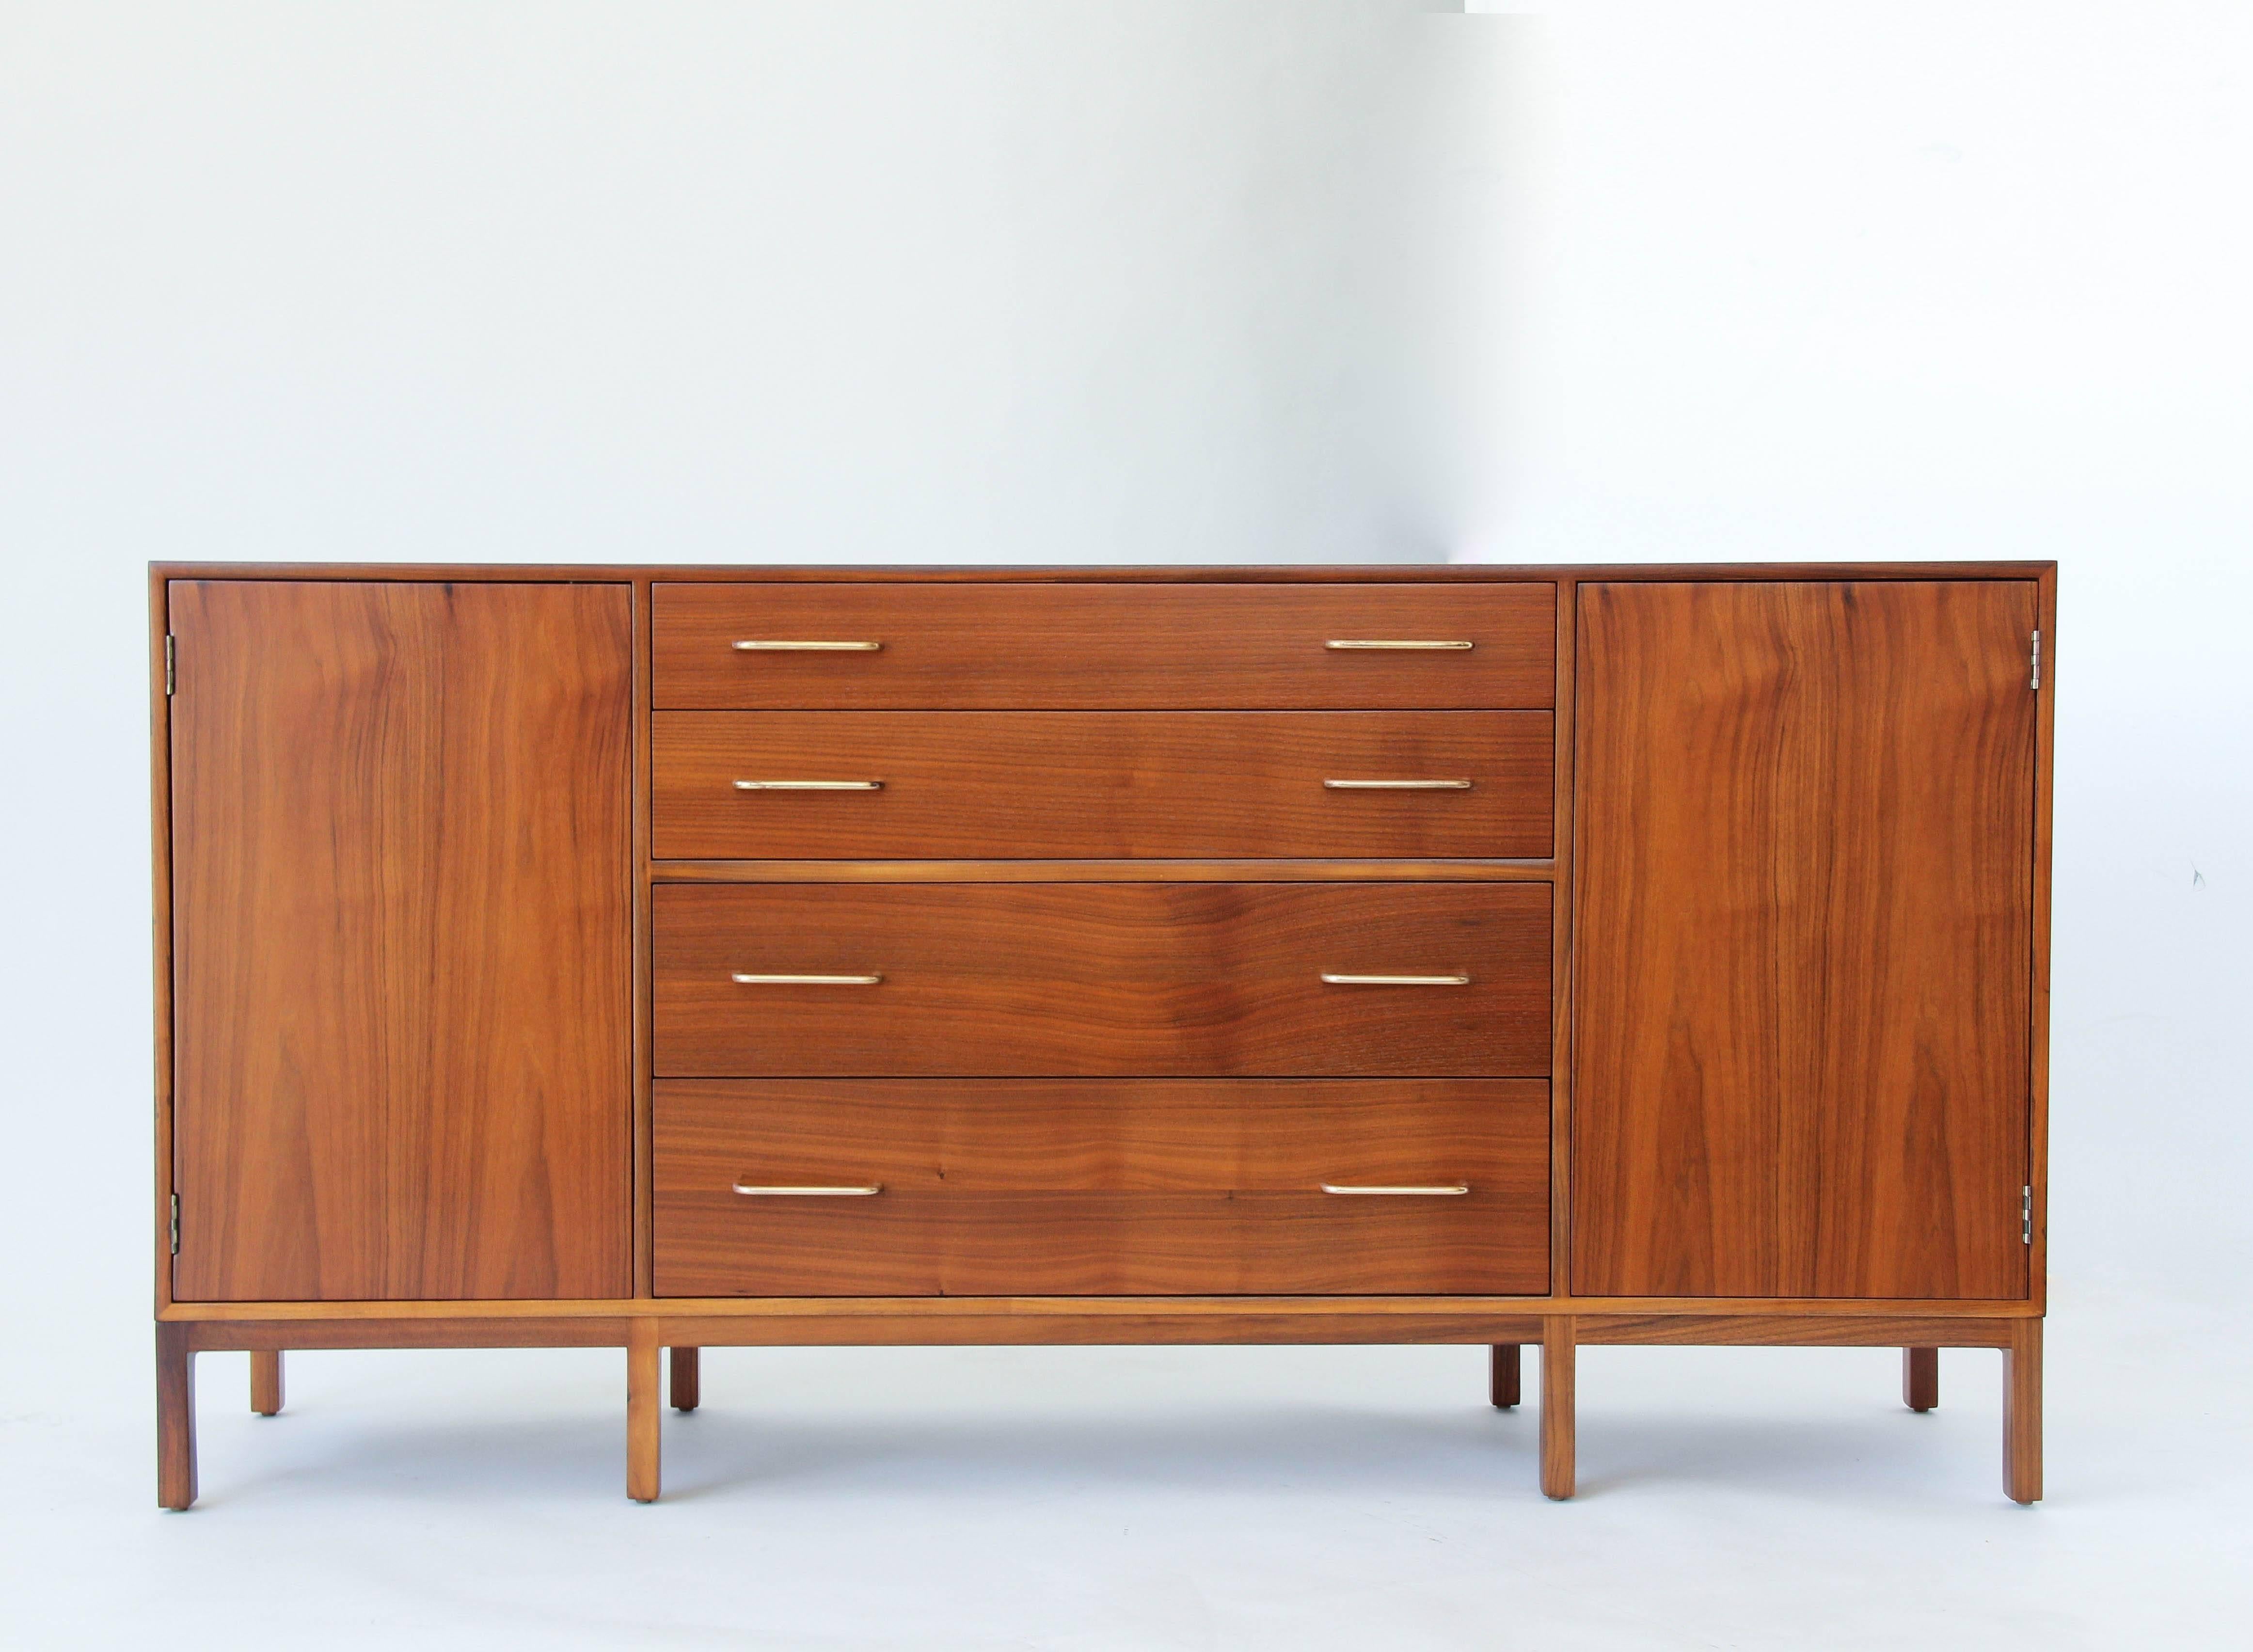 Rare sideboard or credenza designed by Edward Wormley for Dunbar. The mahogany case sits on an eight-legged frame and has two plain cabinet door with concealed push latch closures flanking four drawers with brass bar pulls. The uppermost drawer has